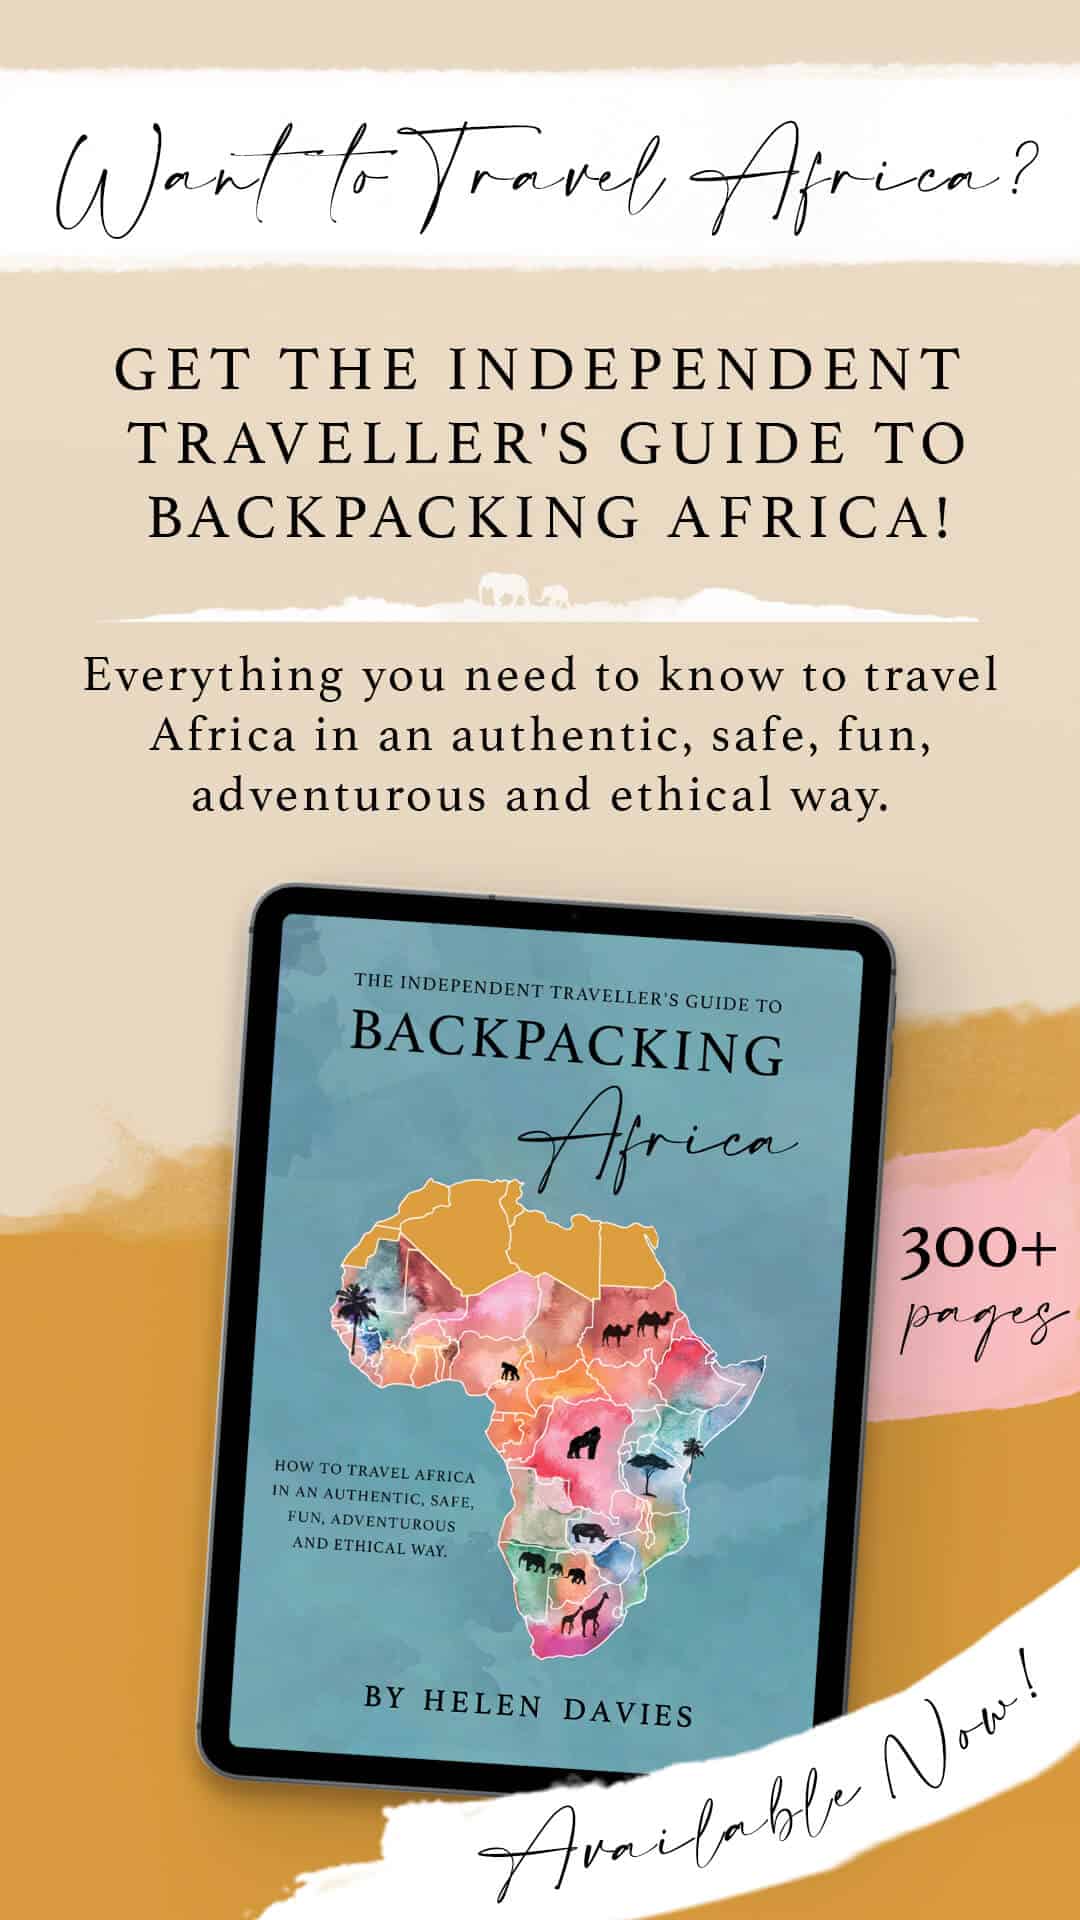 The Independent Traveller's Guide to Backpacking Africa